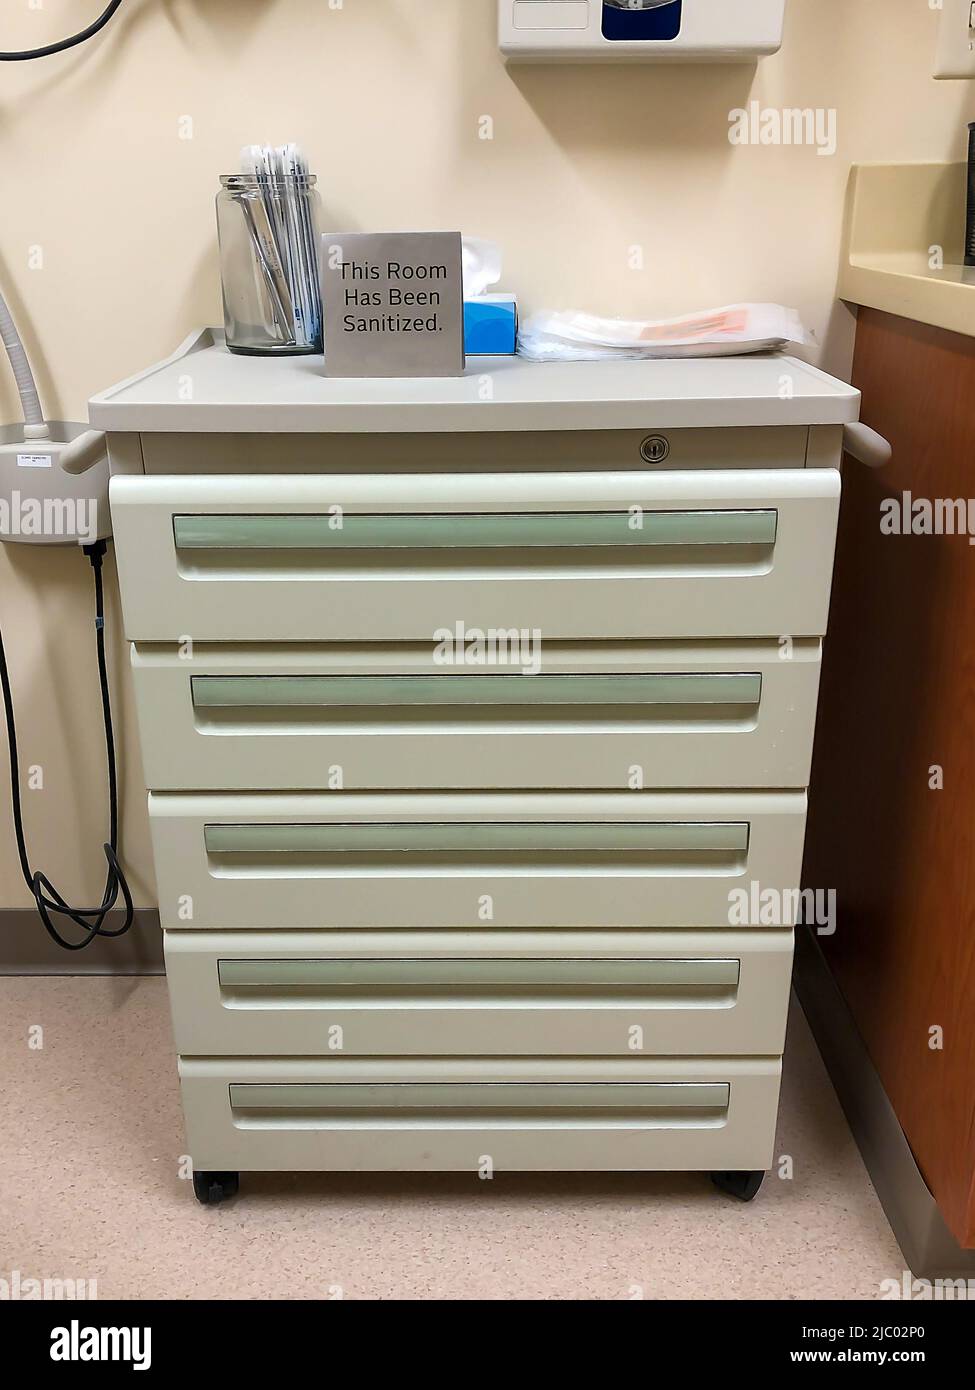 Five Drawer Medical Cabinet in a doctors office or clinic, with sign that reads This Room Has Been Sanitized. Hygiene for patient health and safety. Stock Photo